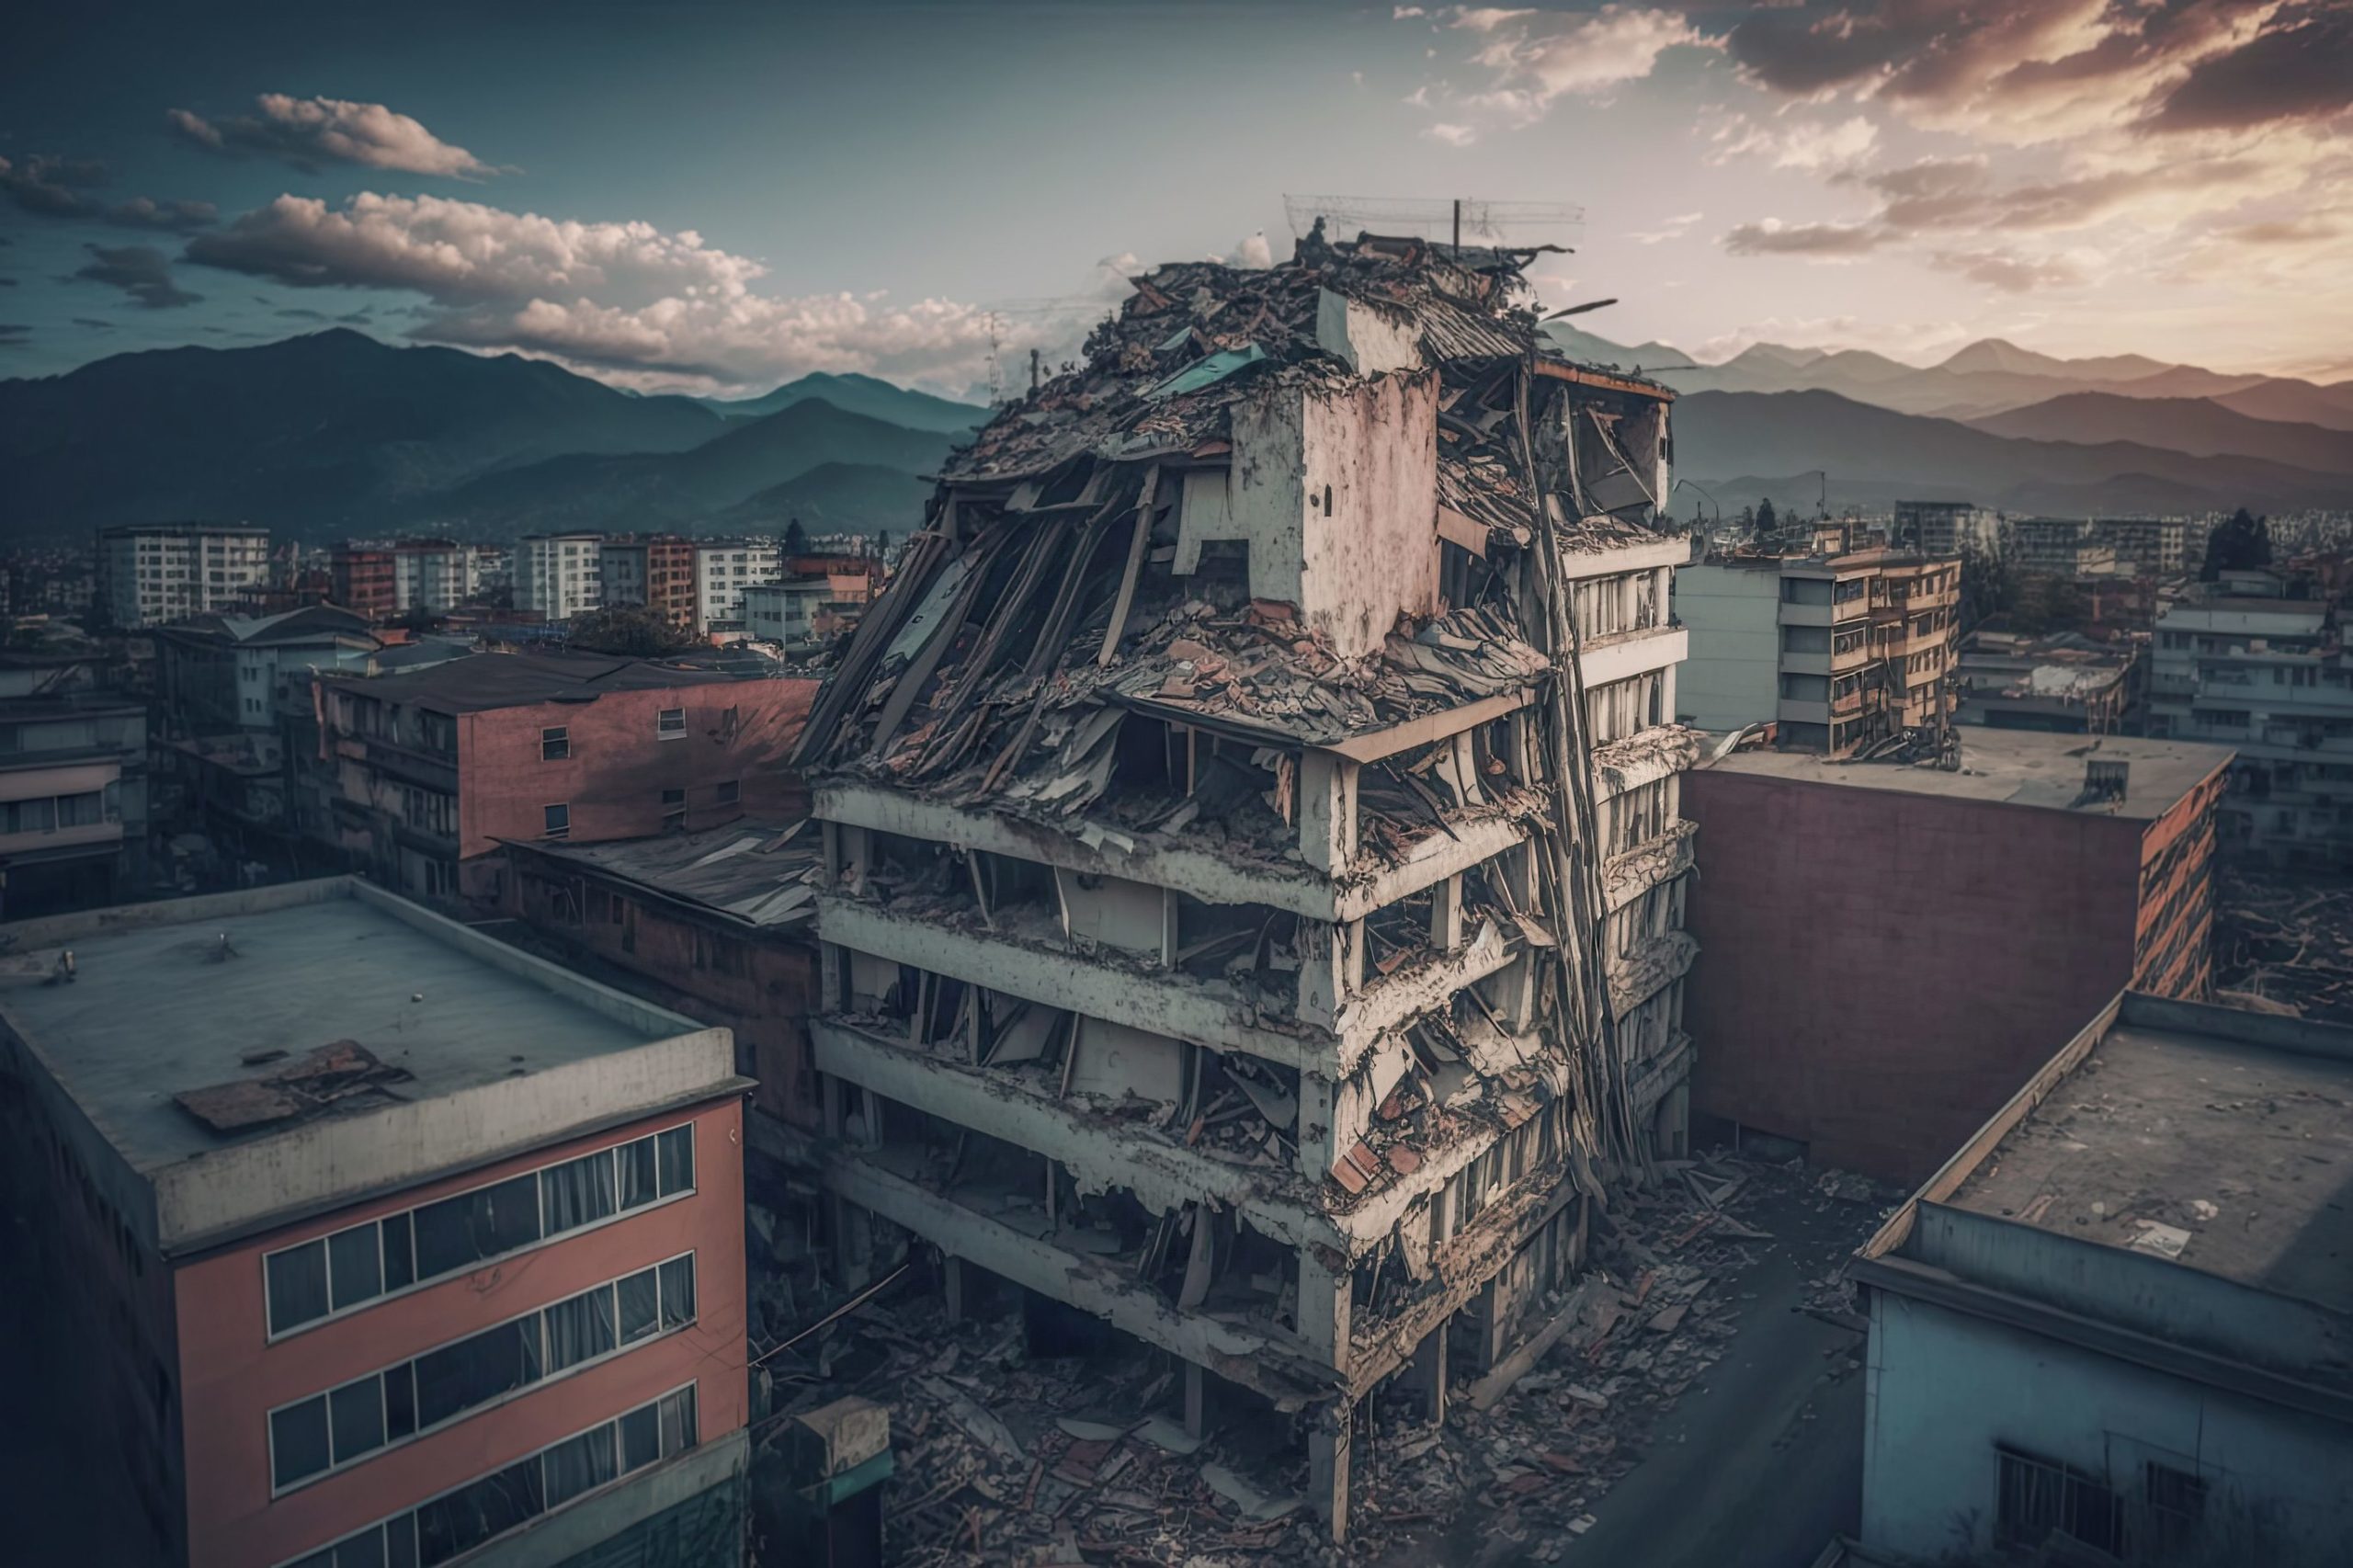 Aftermath of a destructive event, either an earthquake or shelling, in the Middle East, specifically in Turkey and Syria. A building, possibly a high-rise, has been severely damaged and partially.